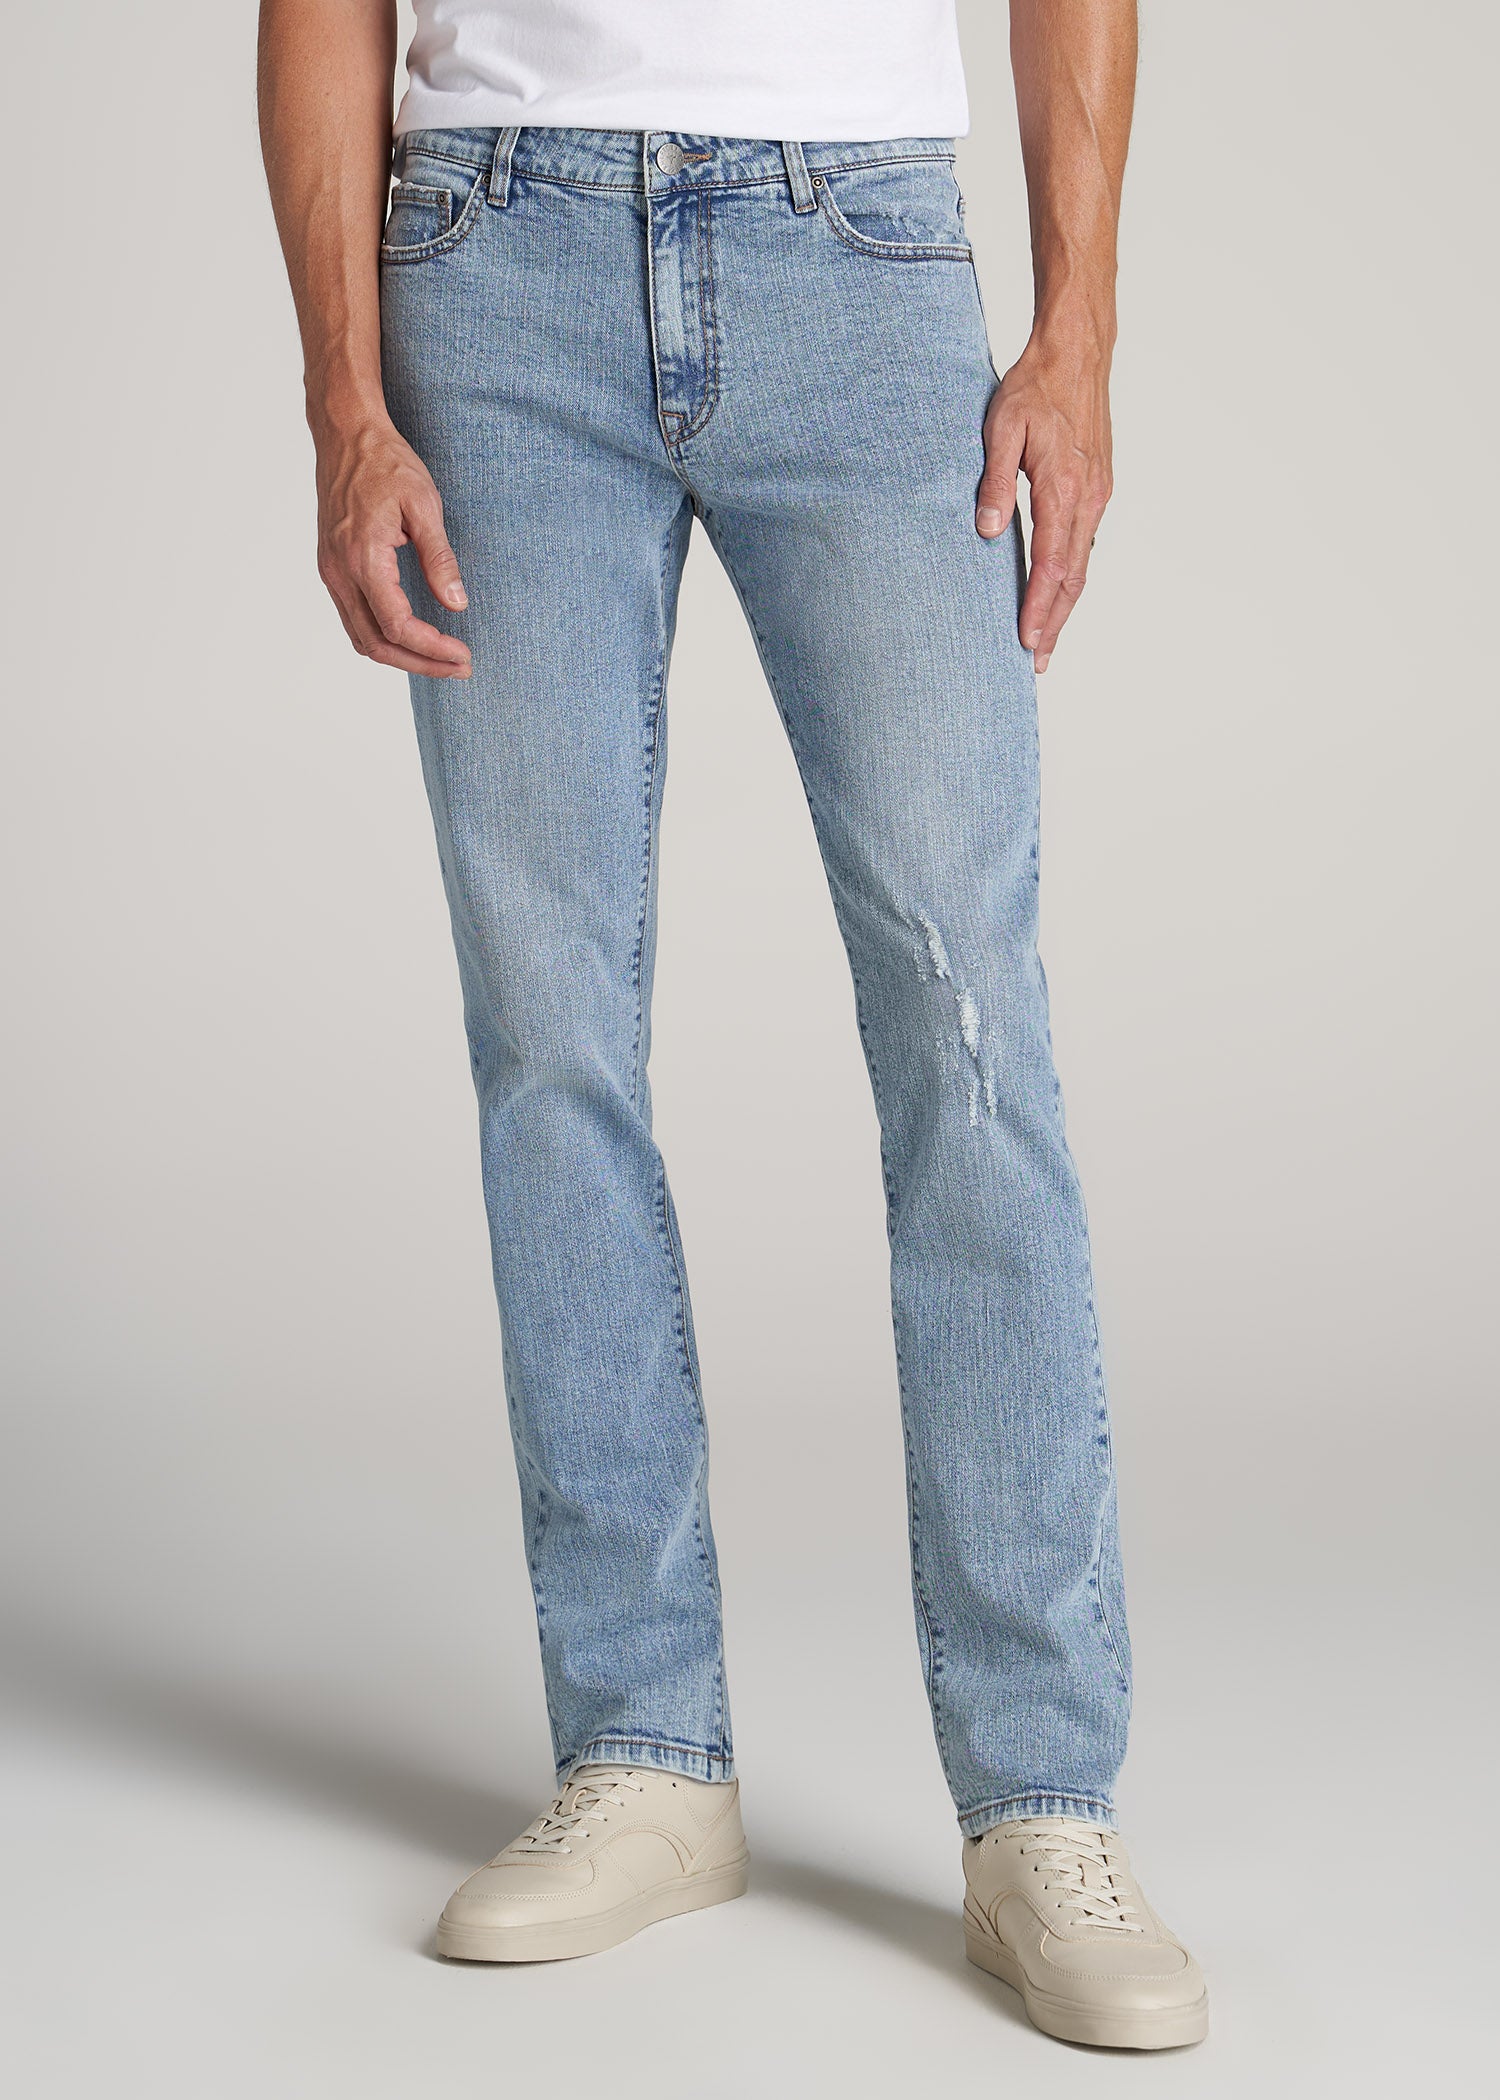 Dylan Fit Jeans Retro Blue For Tall Men | American Tall